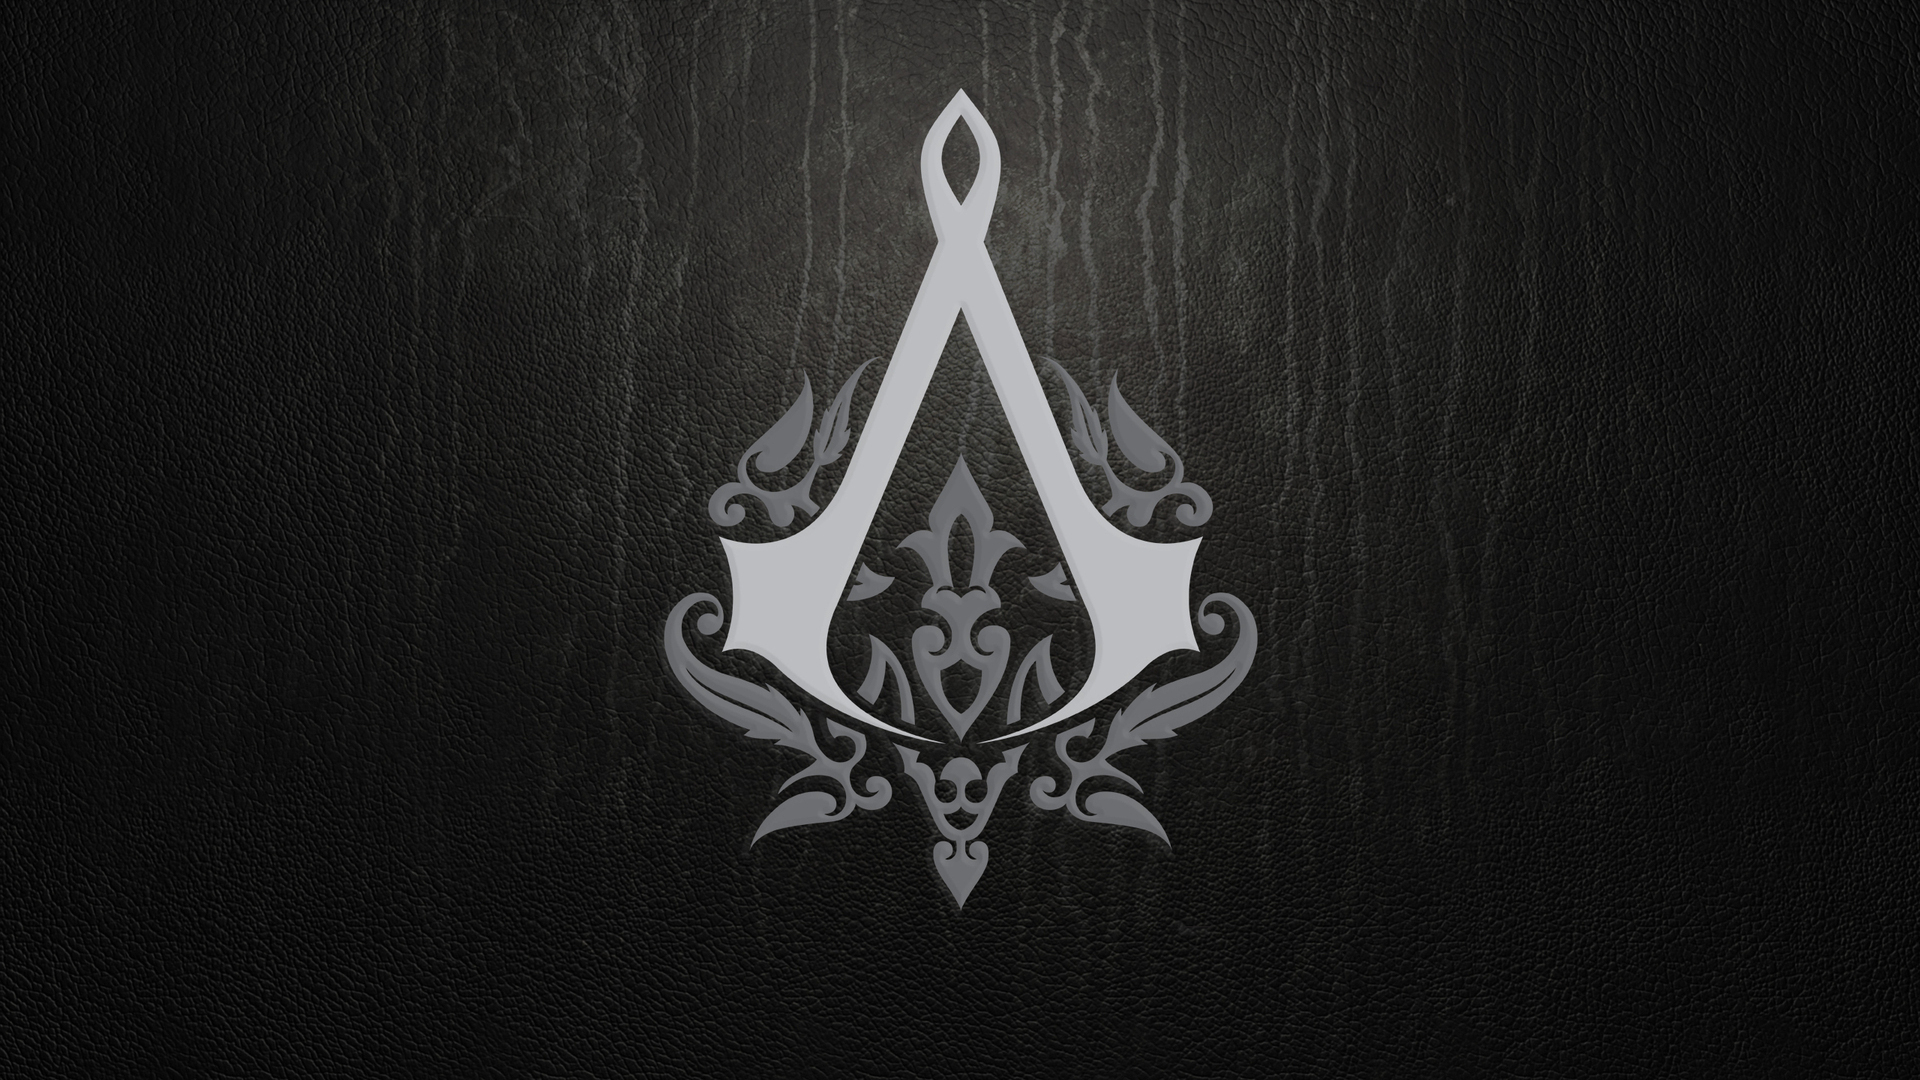 Download Assassins Creed Logo Wallpaper HD Desktop pictures in high 1920x1080